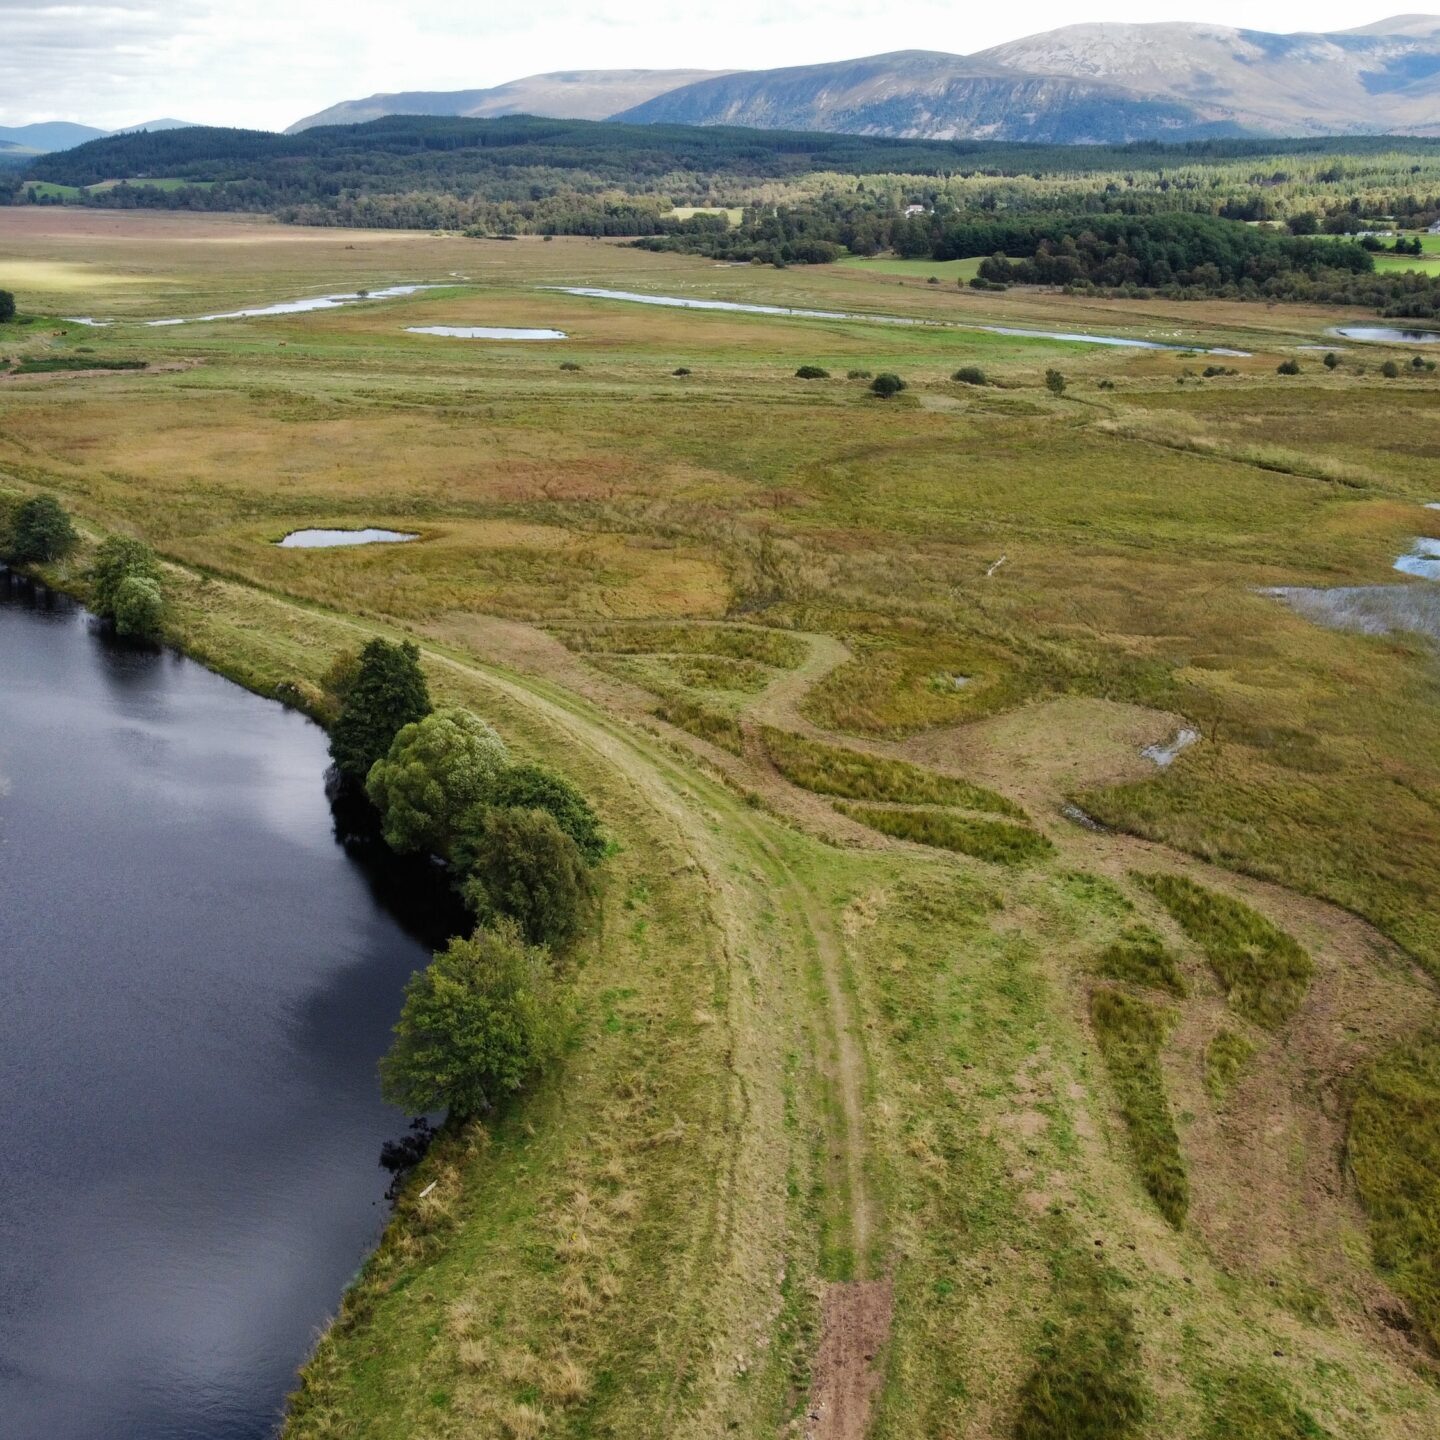 Drone image of the Dell of Killiehuntly, Insh Marshes. Clearly showing the result of the topping management.